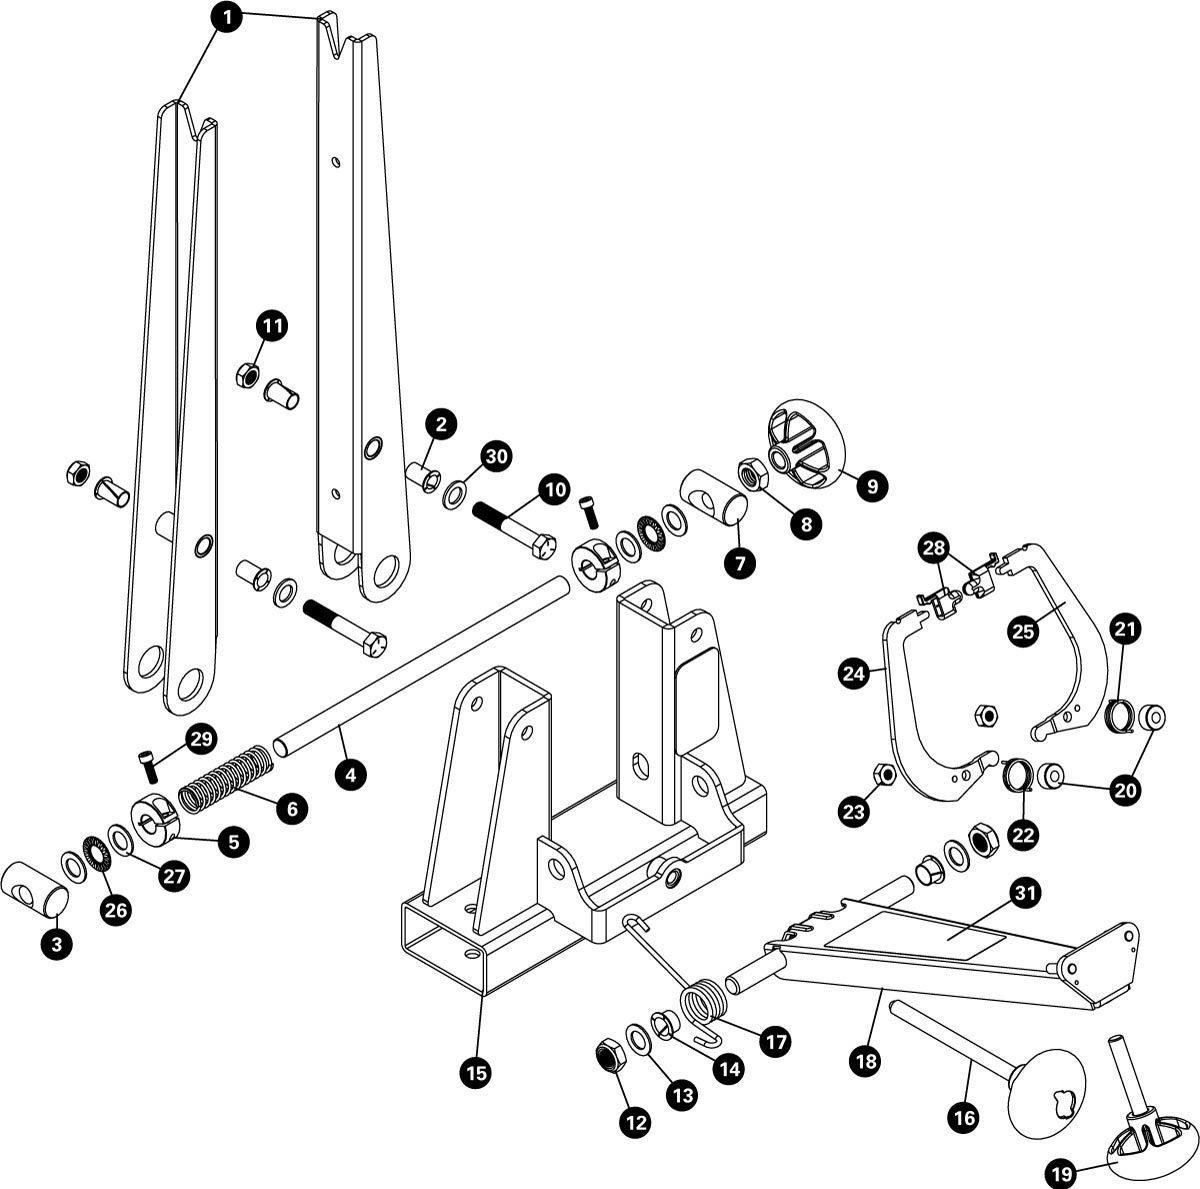 Parts diagram for TS-2.2P Powder Coated Professional Wheel Truing Stand, click to enlarge